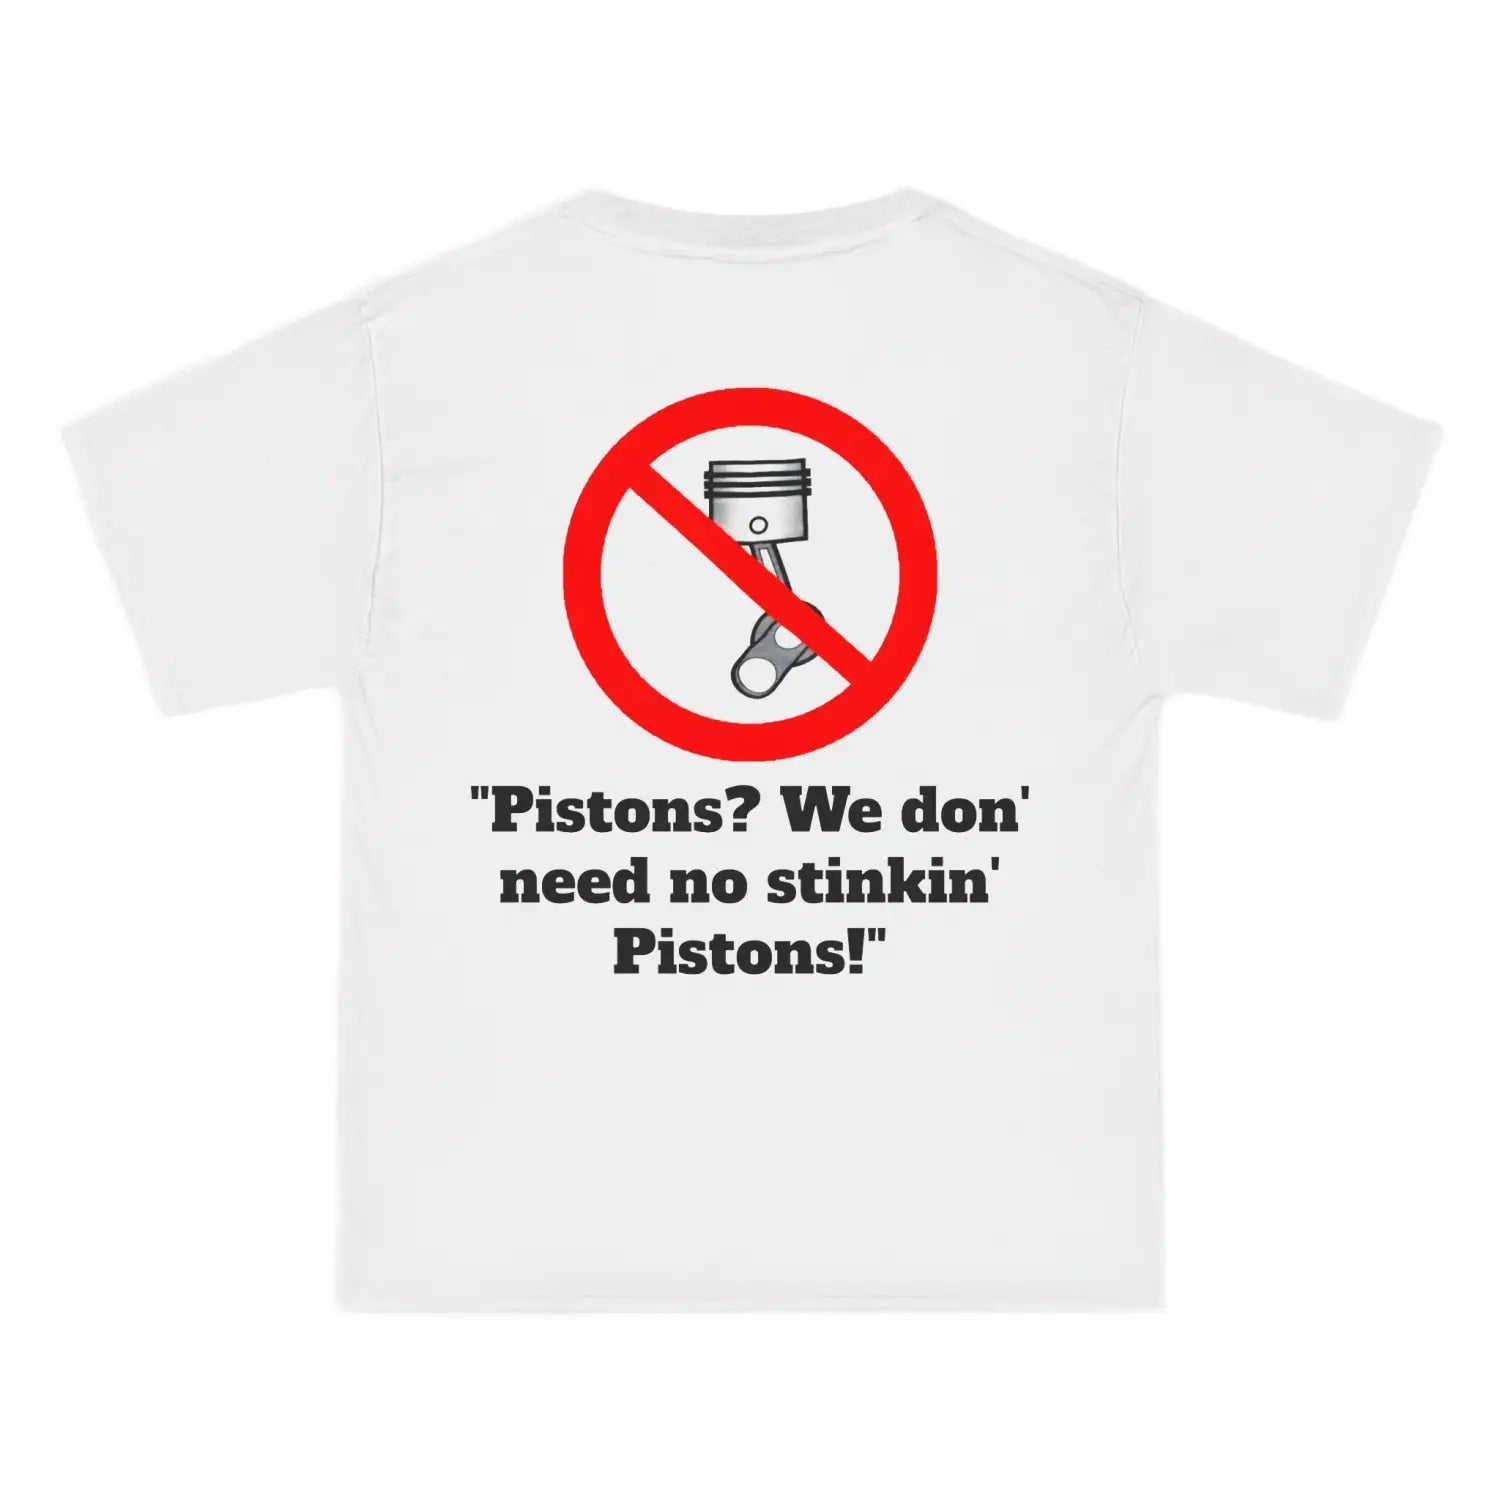 Rx-7 ’Don’ need no Pistons’ Beefy-T® Short-Sleeve